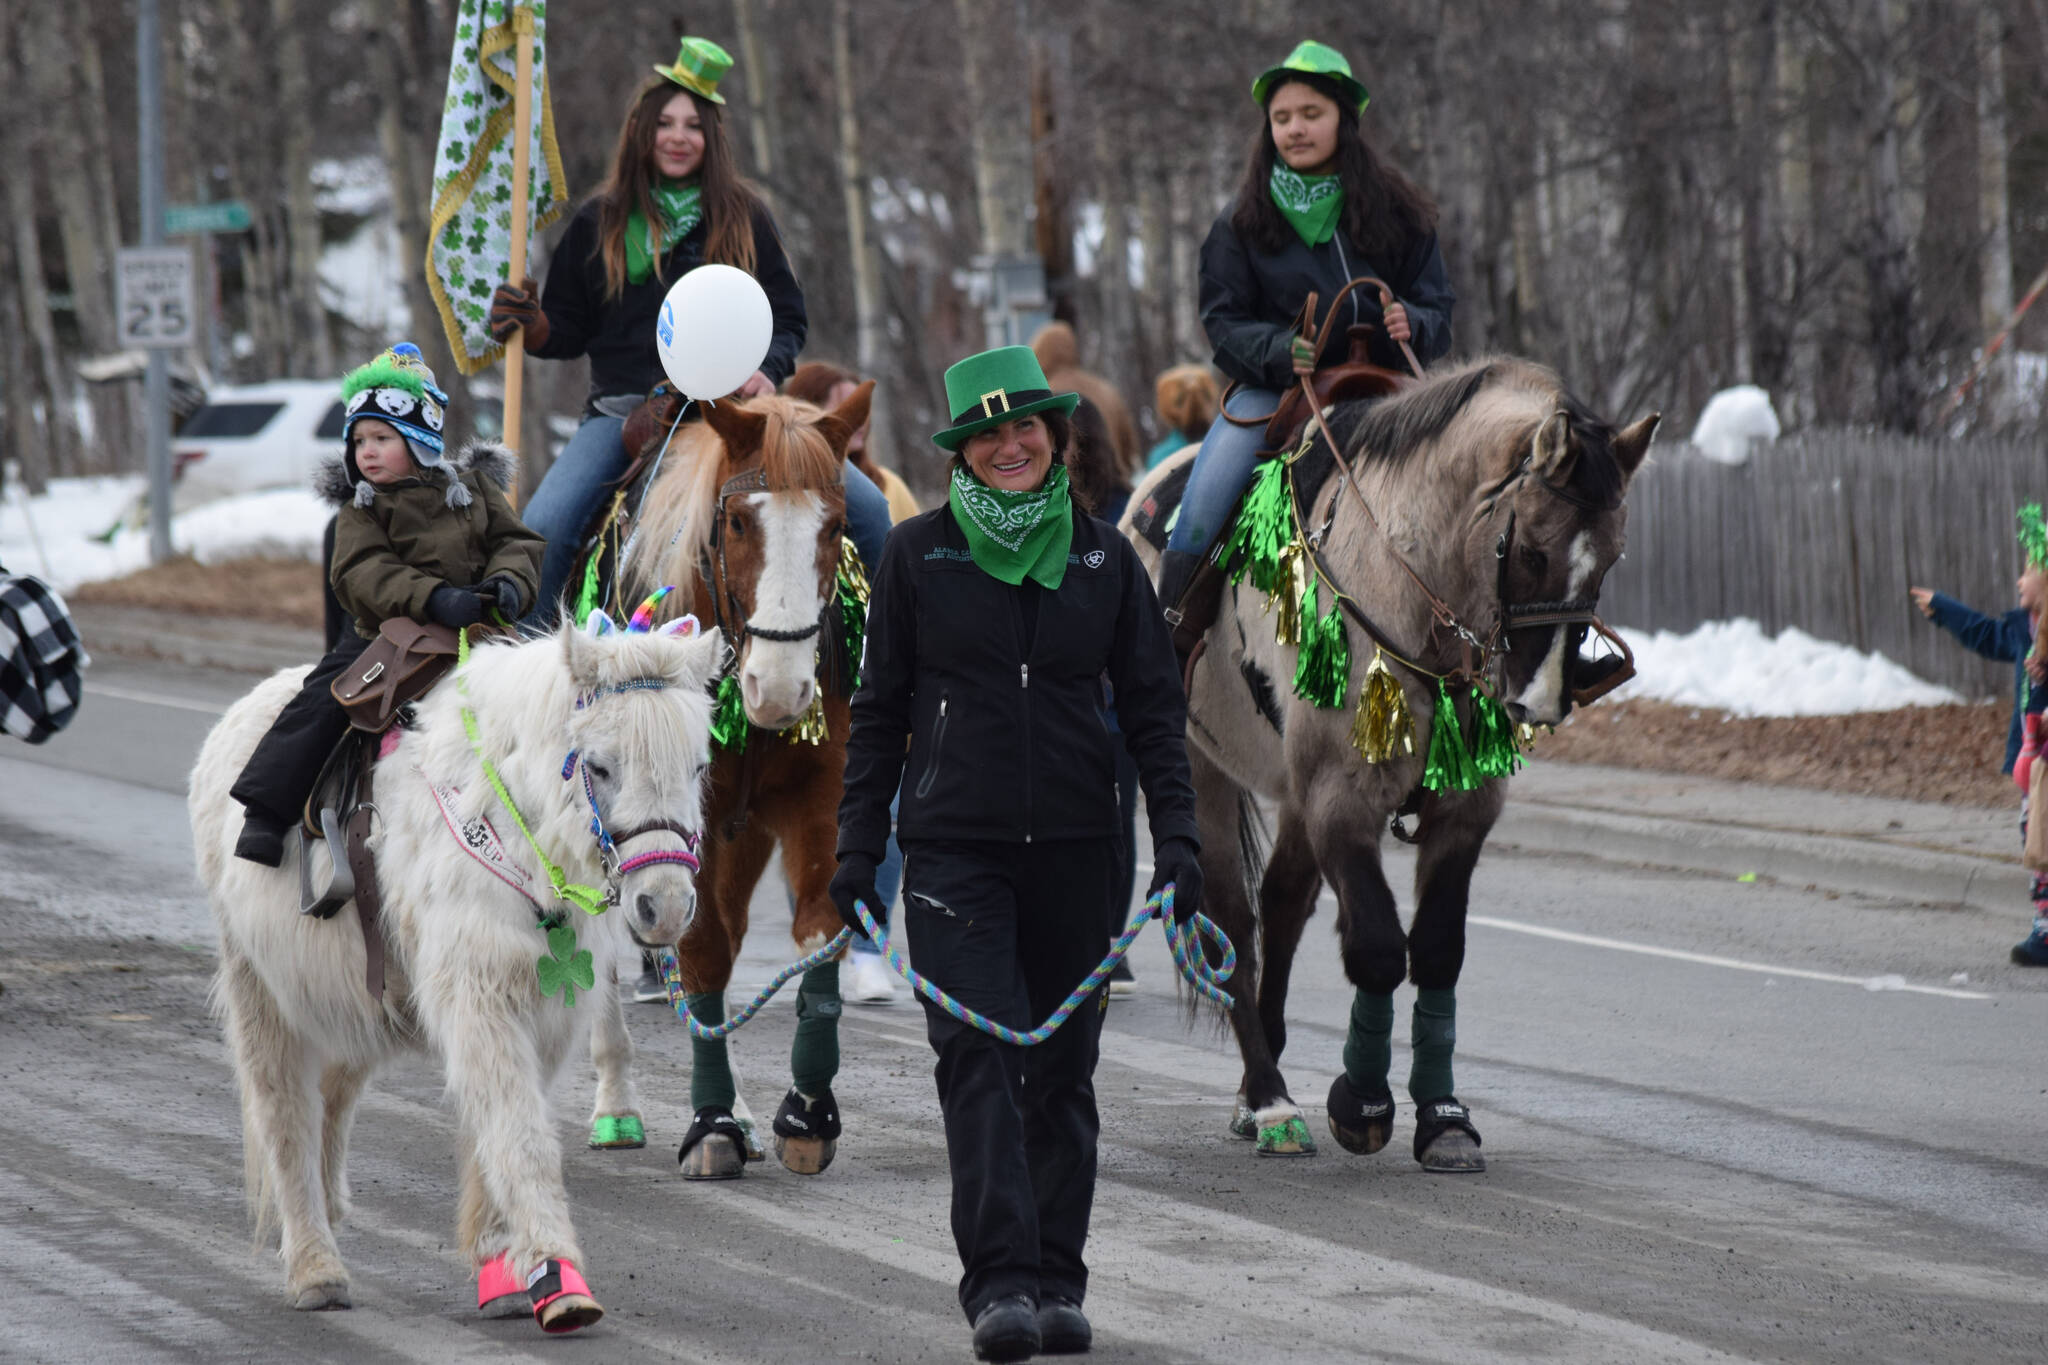 Community members participate in the St. Patrick’s Parade in Soldotna on March 17, 2022. (Camille Botello/Peninsula Clarion)